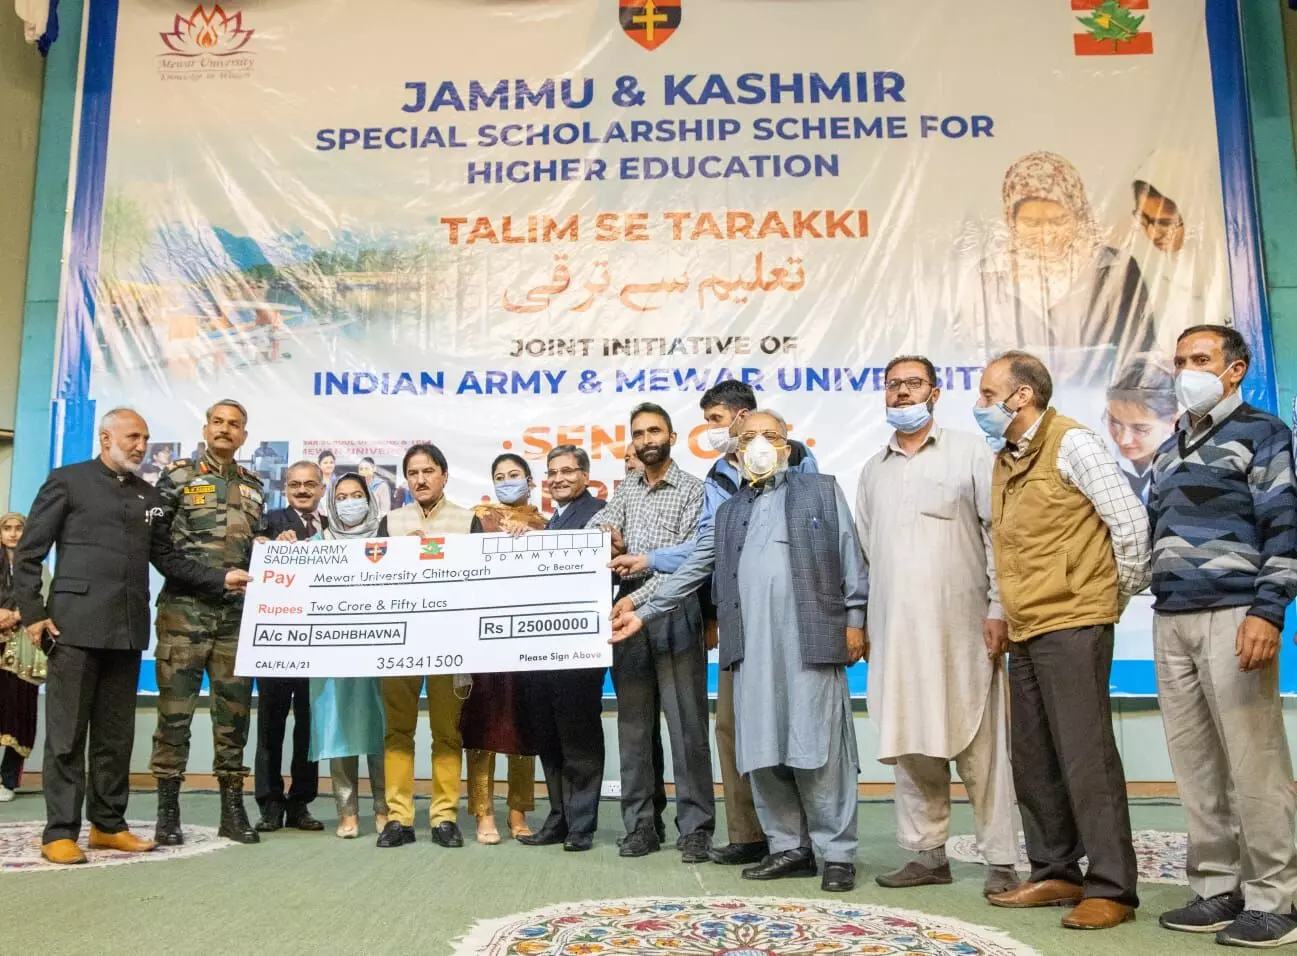 Indian Army felicitates students of J&K to pursue higher education at Mewar university